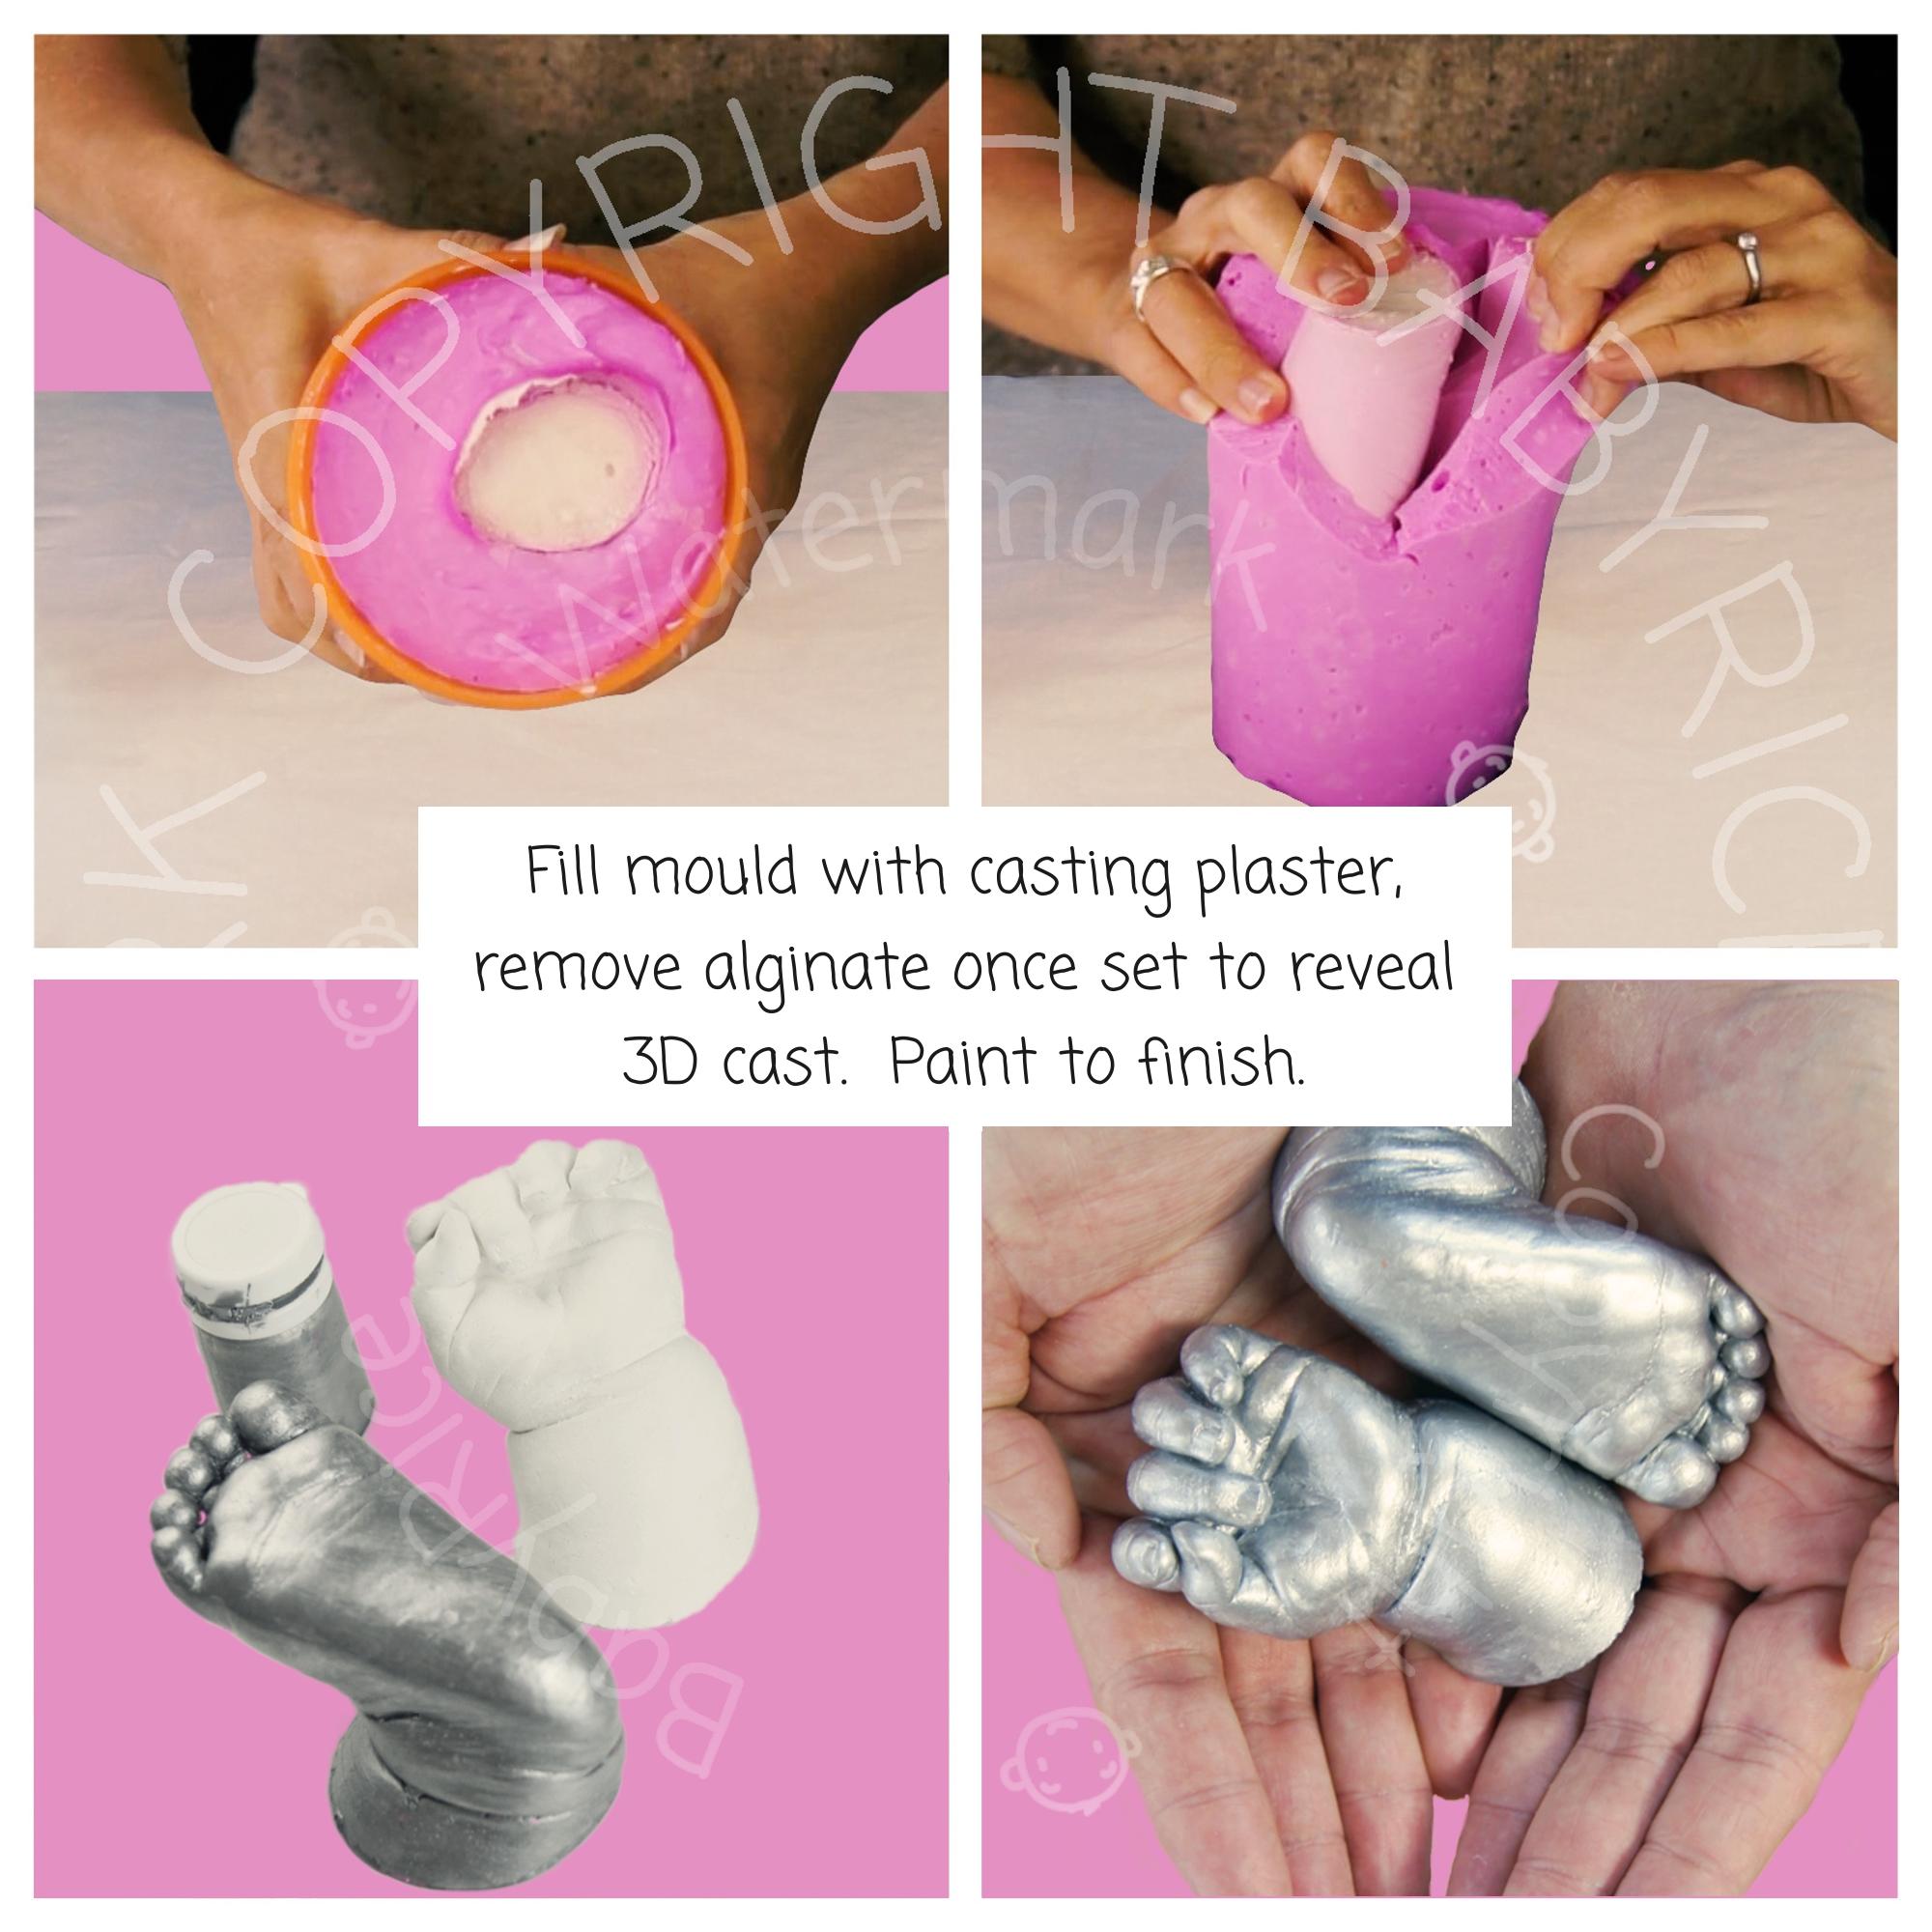 Fill your mould with plaster to create a cast and paint it